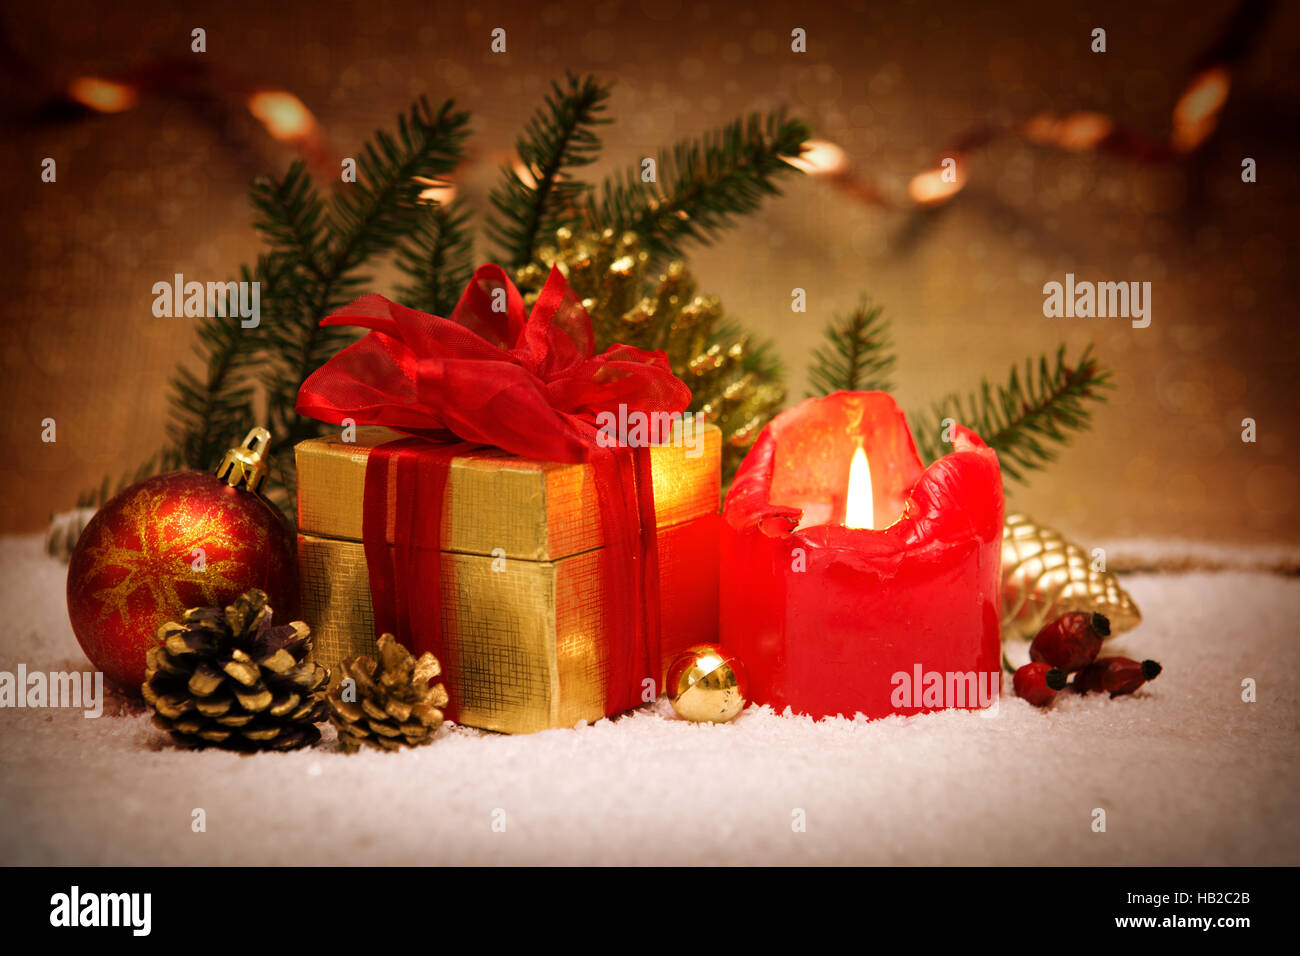 Red Advent candle and Christmas gift. Stock Photo